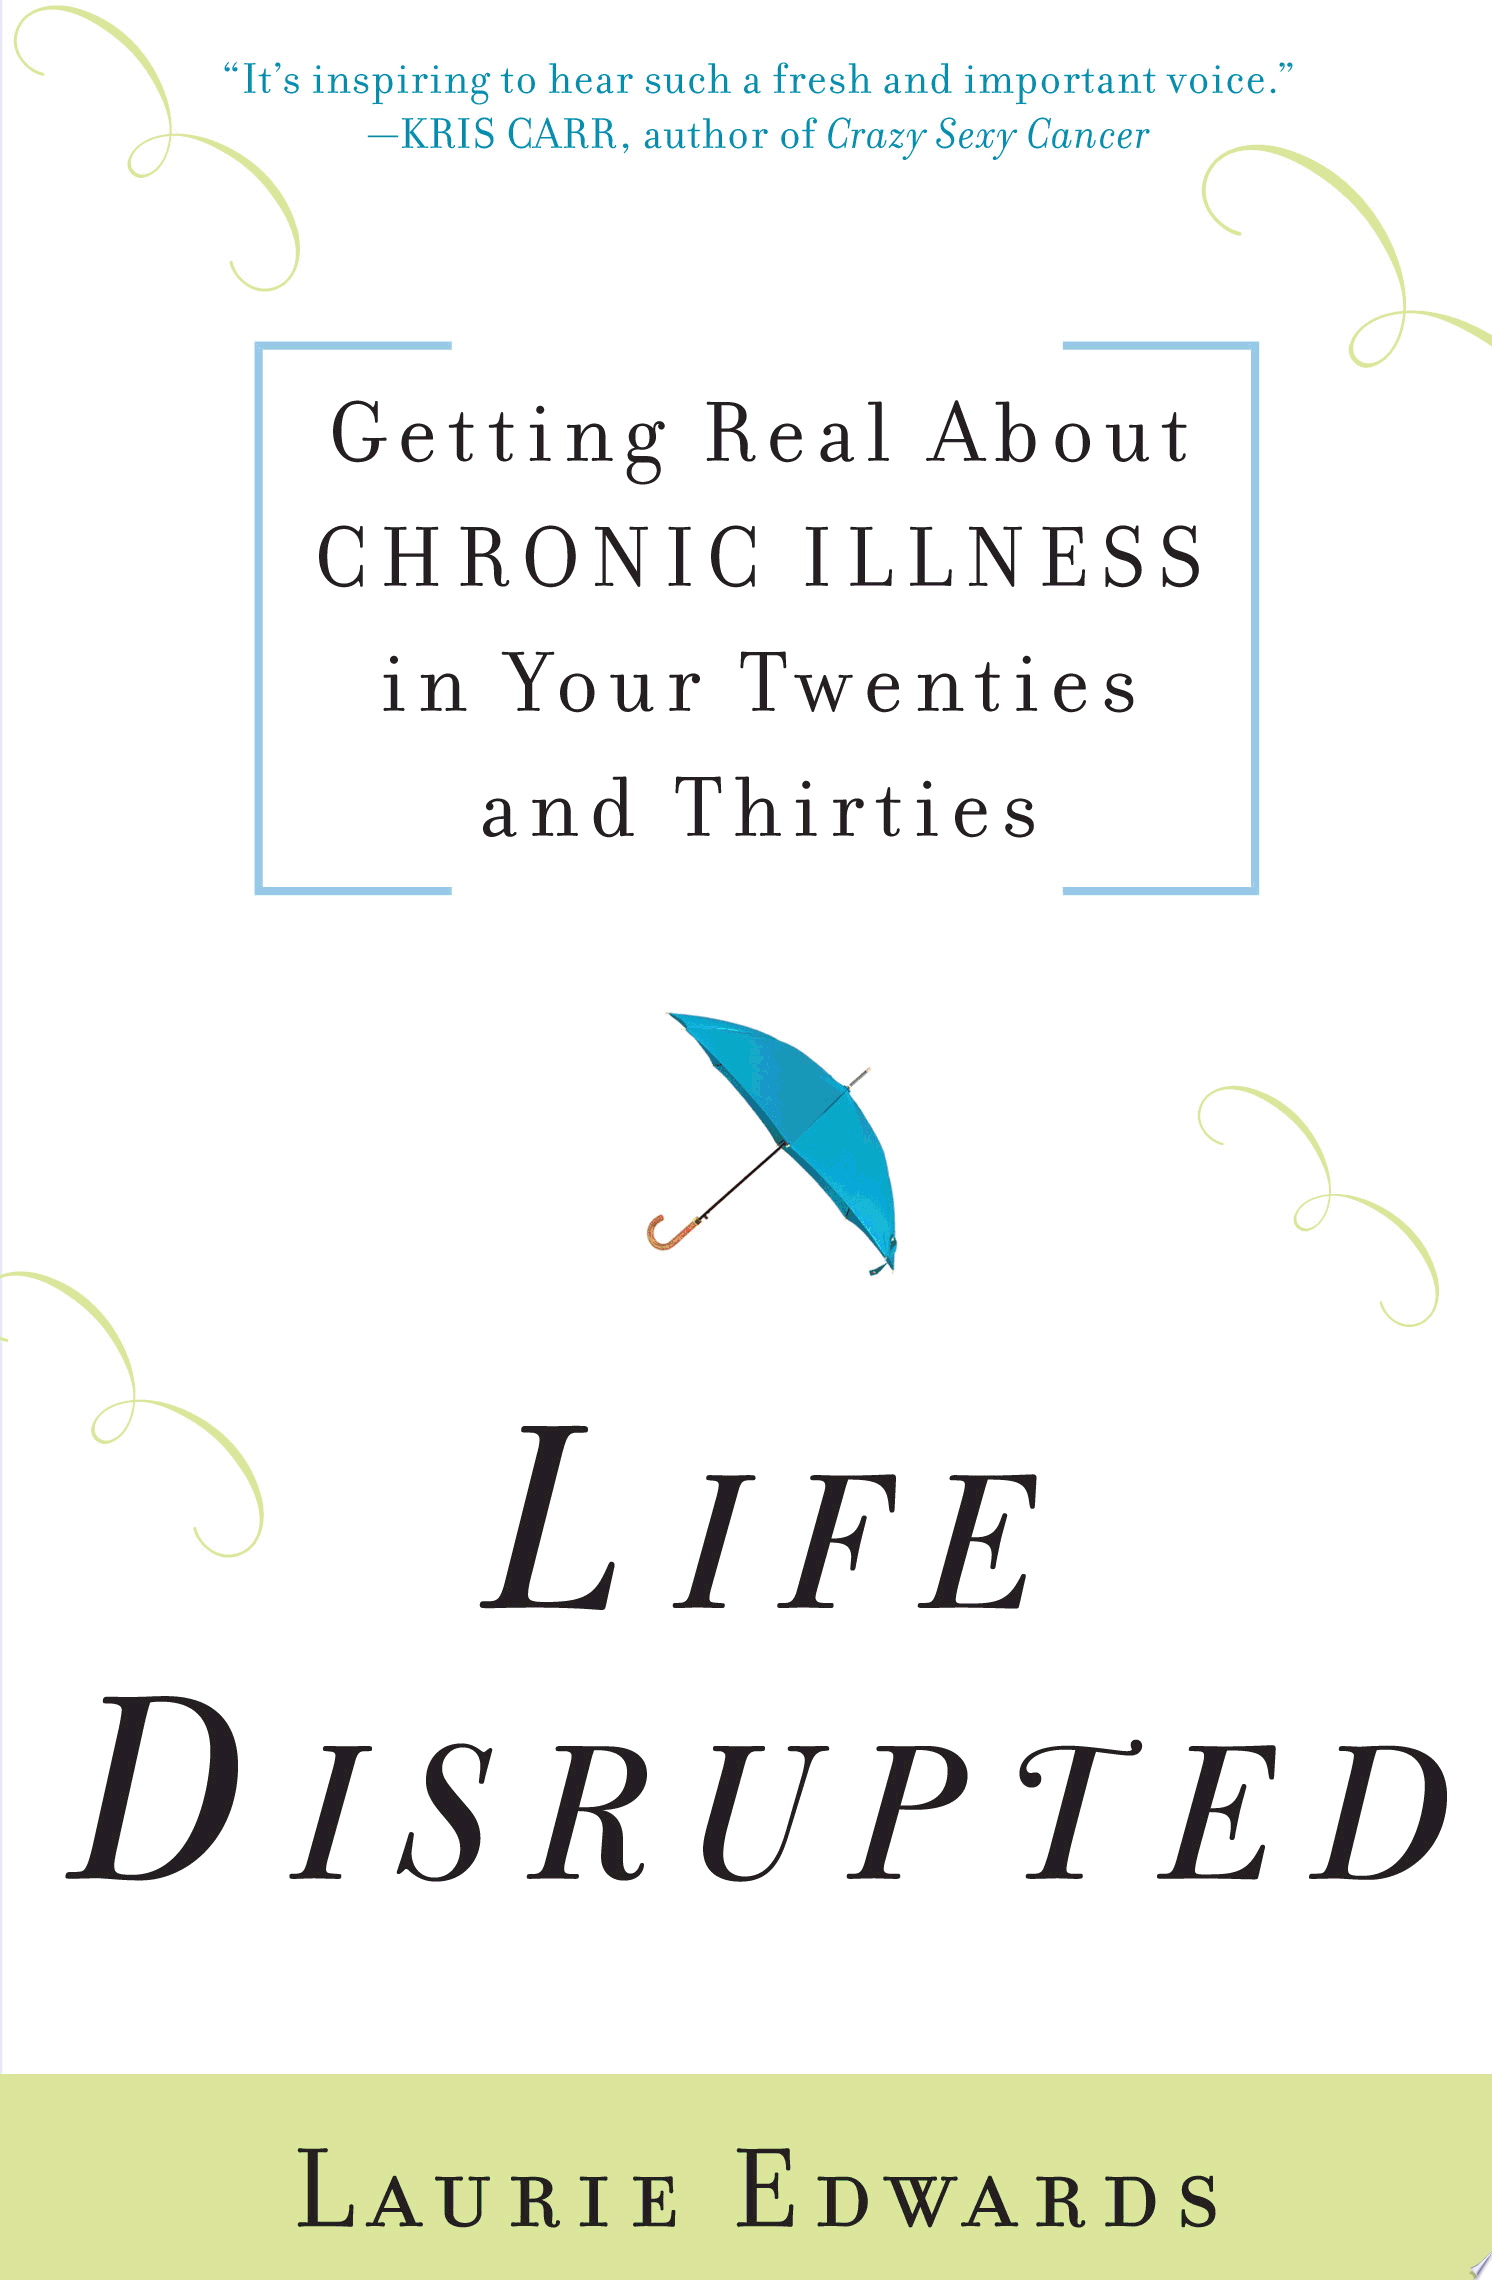 Image for "Life Disrupted"